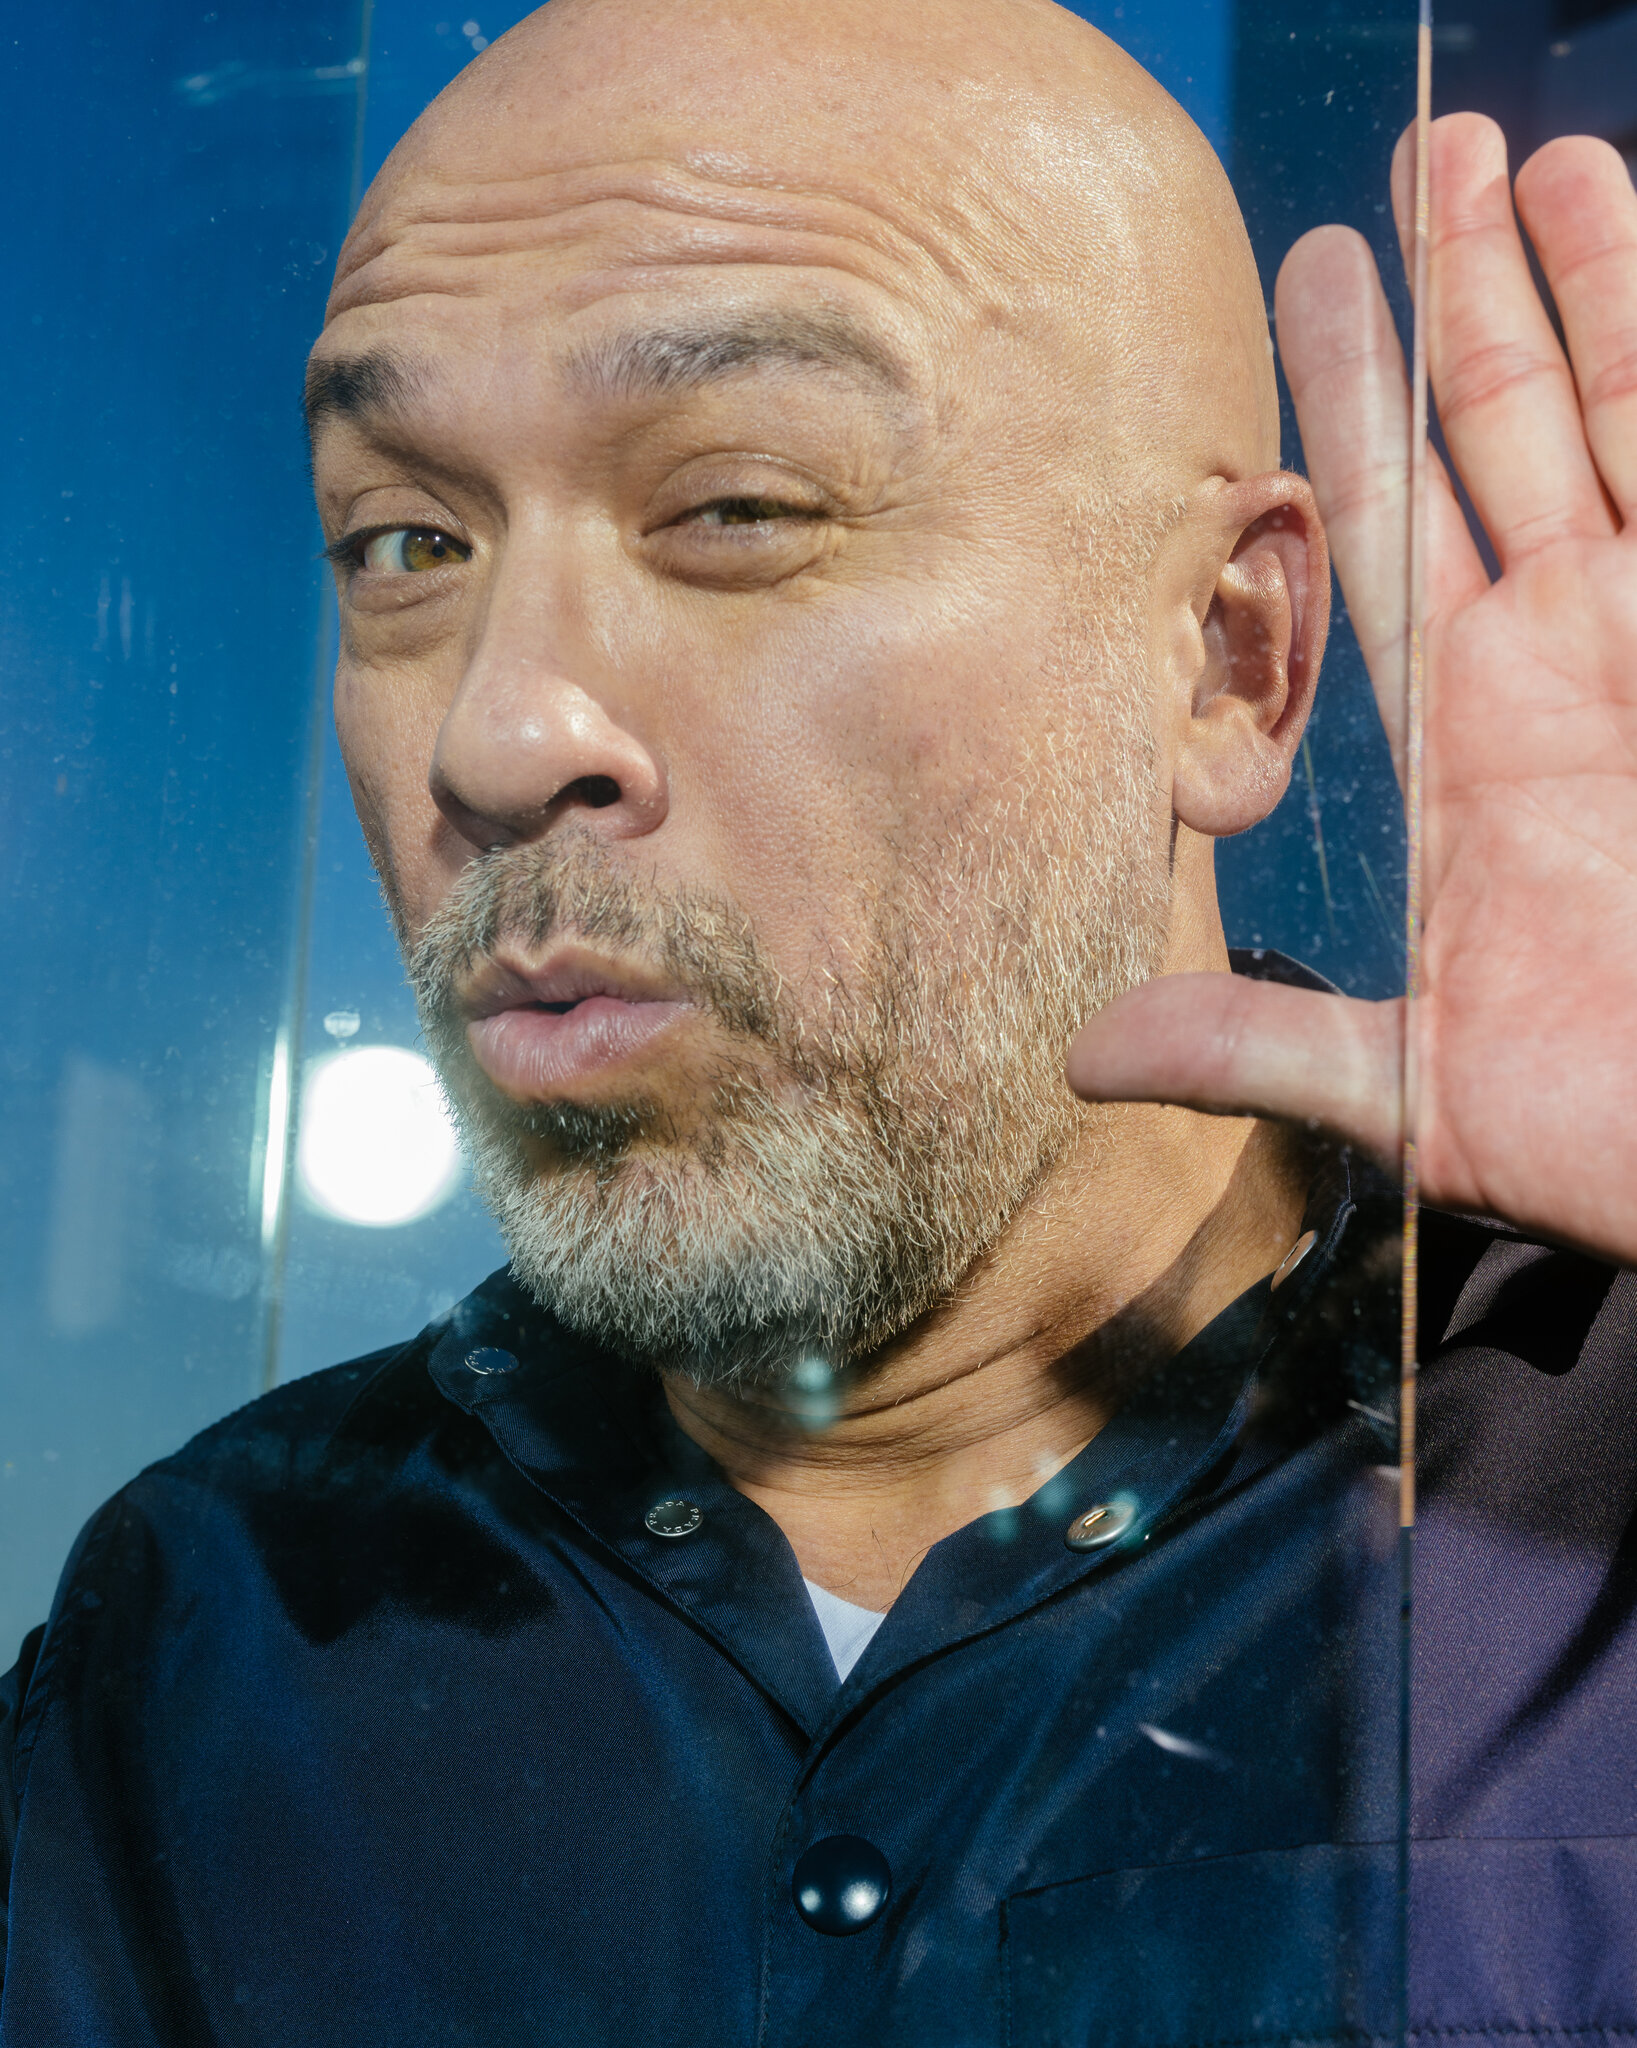 Jo Koy on Comedy They Told Him Wouldn’t Work The New York Times